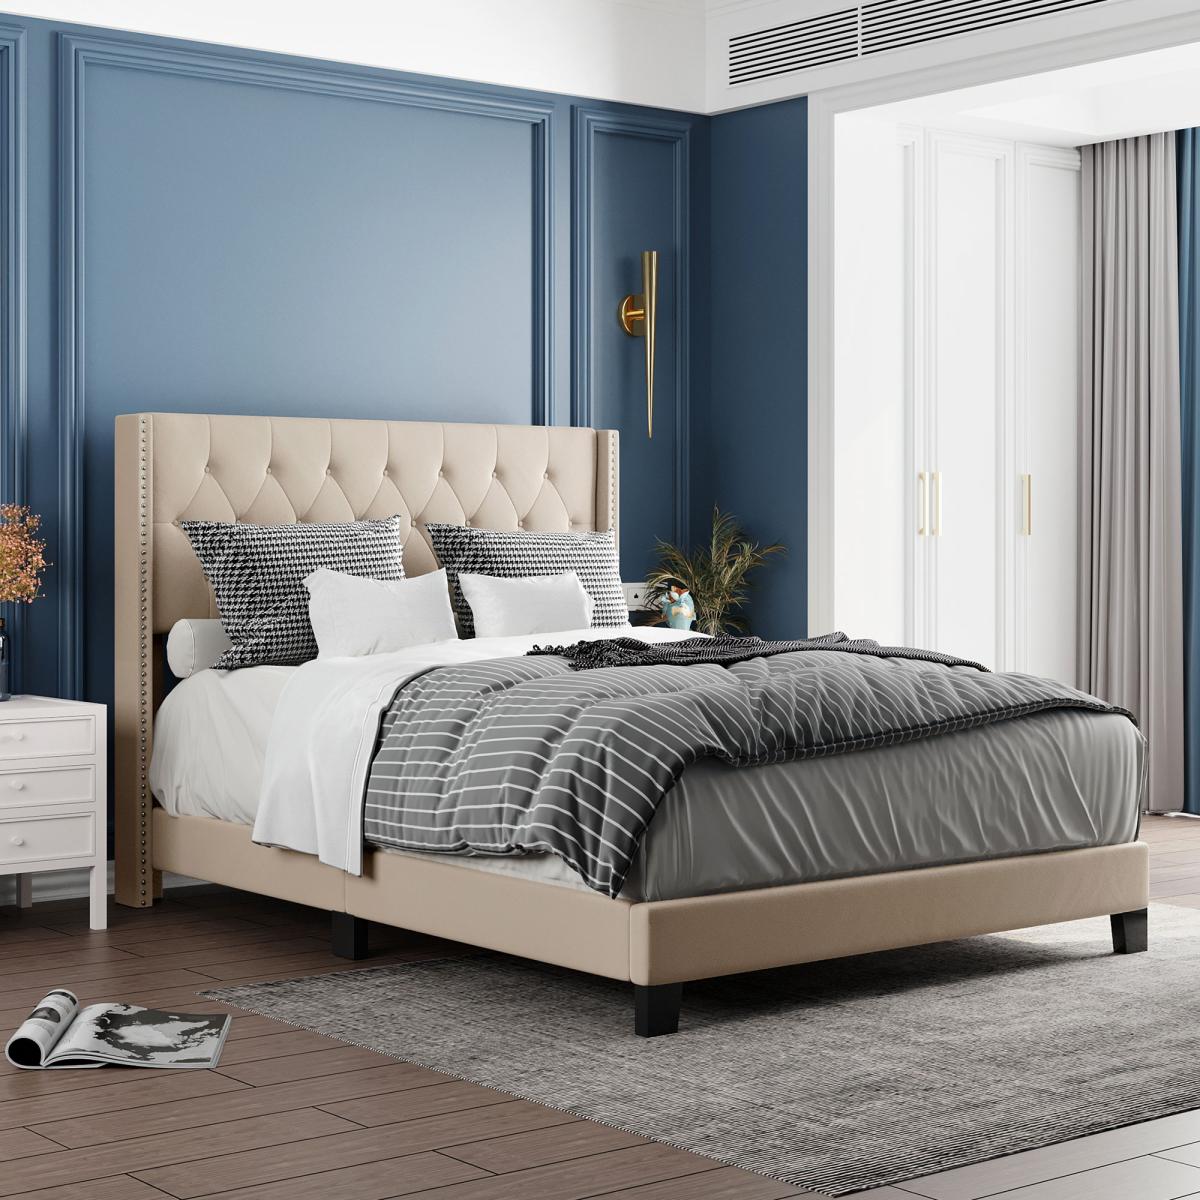 Upholstered Platform Bed with Classic Headboard, Box Spring Needed, Beige Linen Fabric, Queen Size